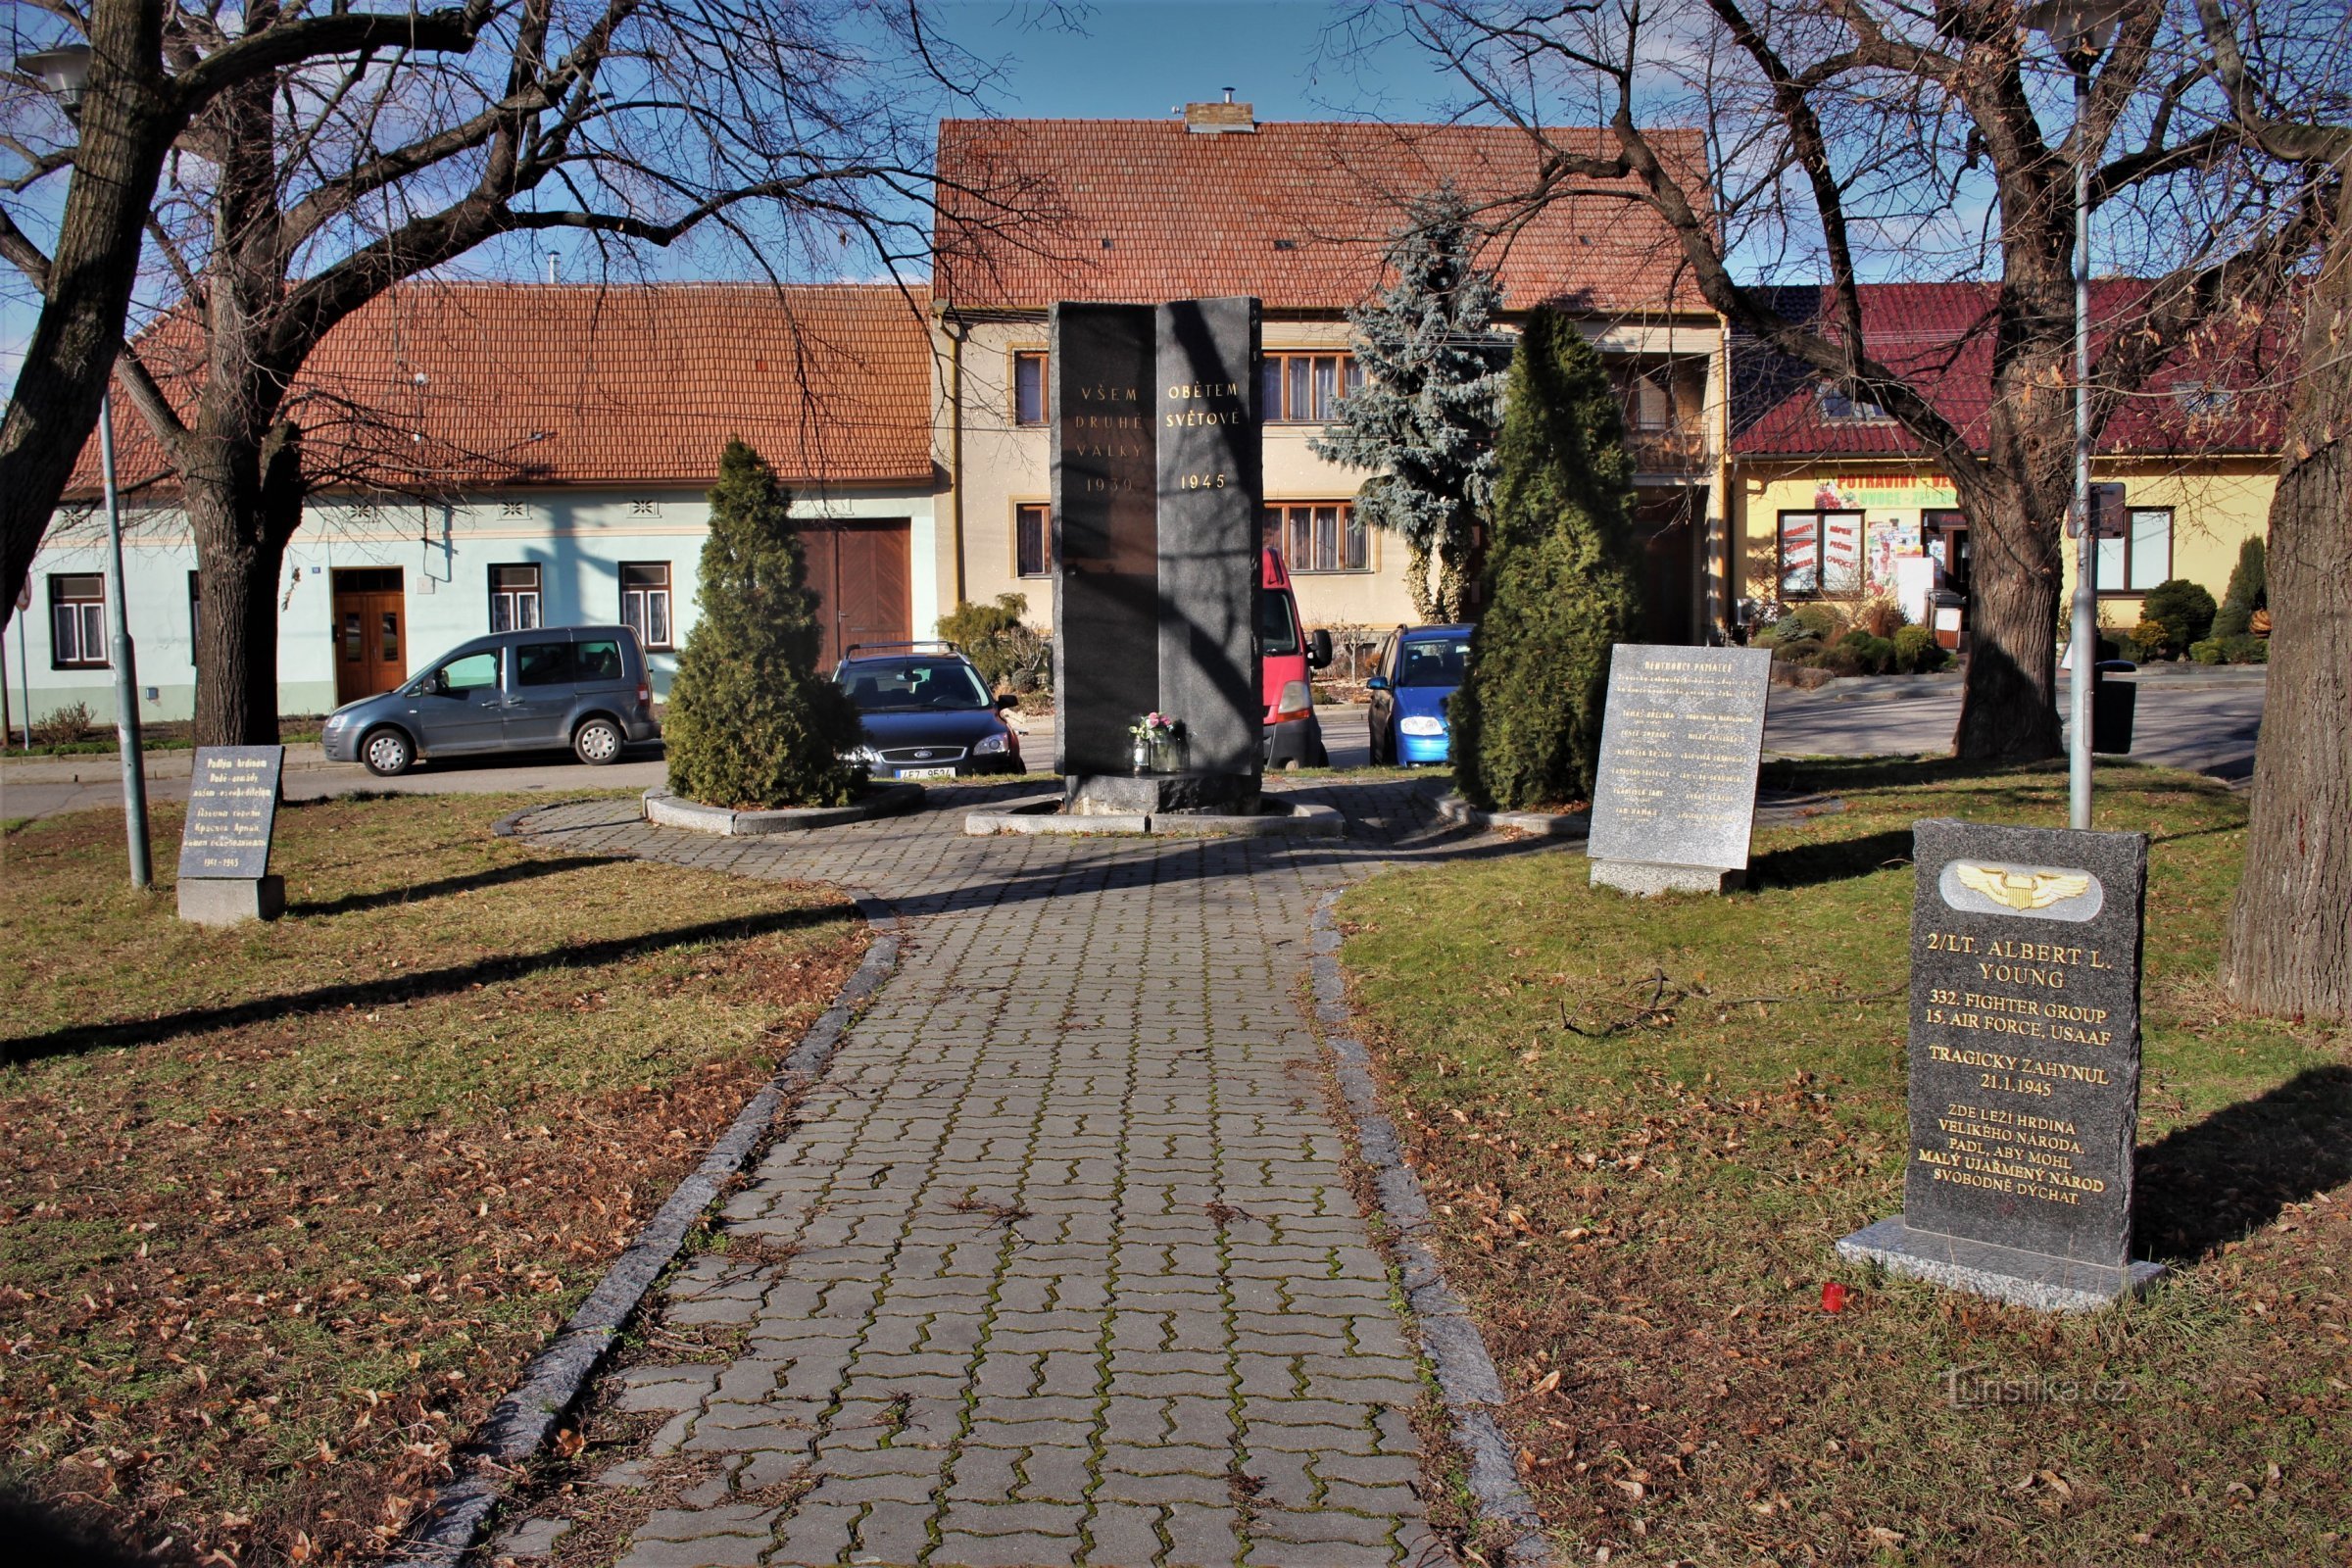 The monument is part of a place of worship on Náměstí Svobody in the center of the village